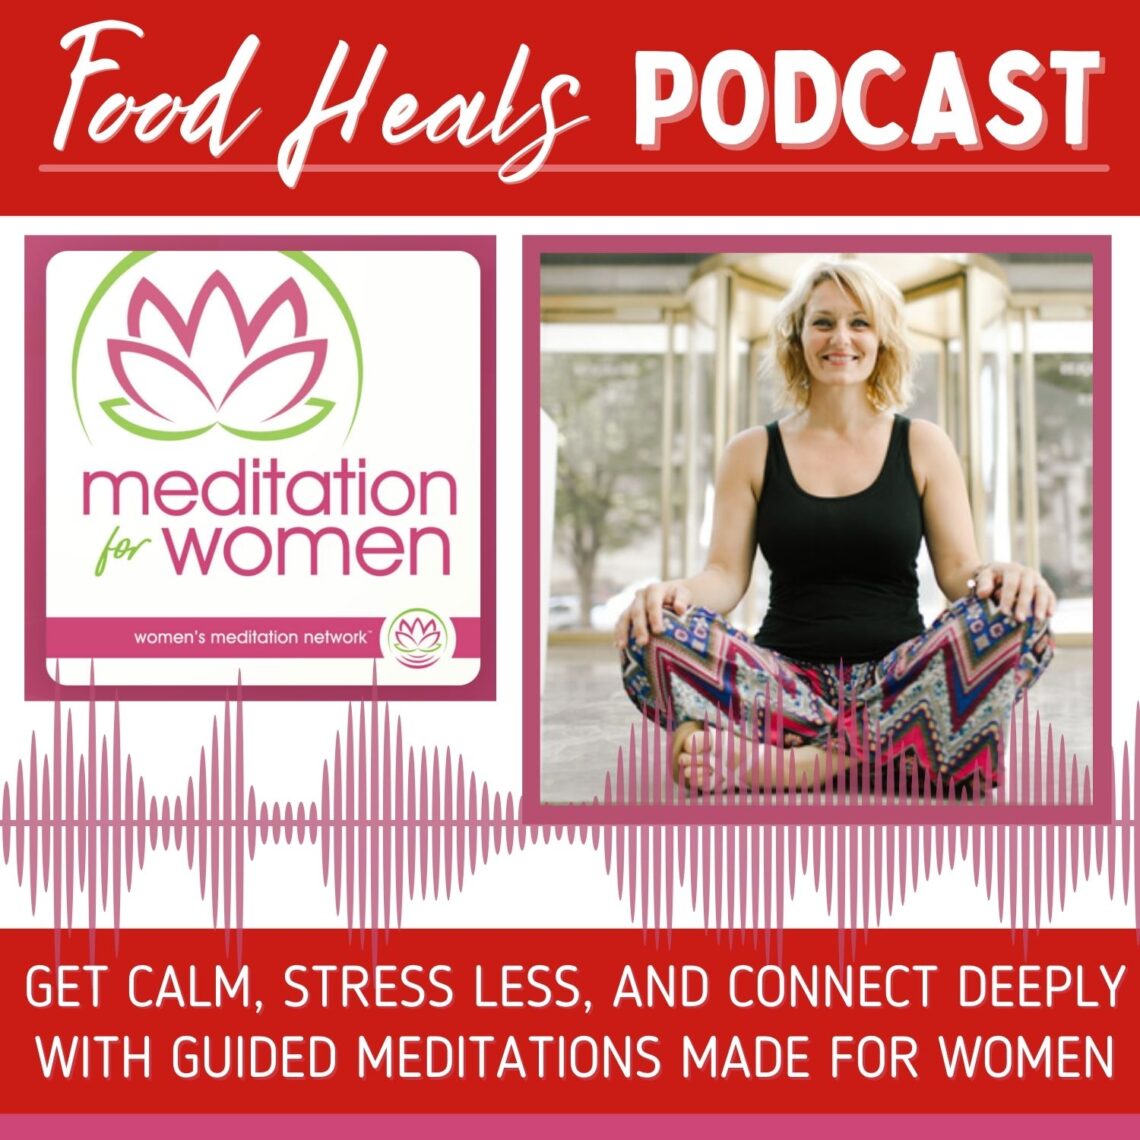 Get Calm, Stress Less, and Connect Deeply with Guided Meditations Made For Women by Katie Krimitsos